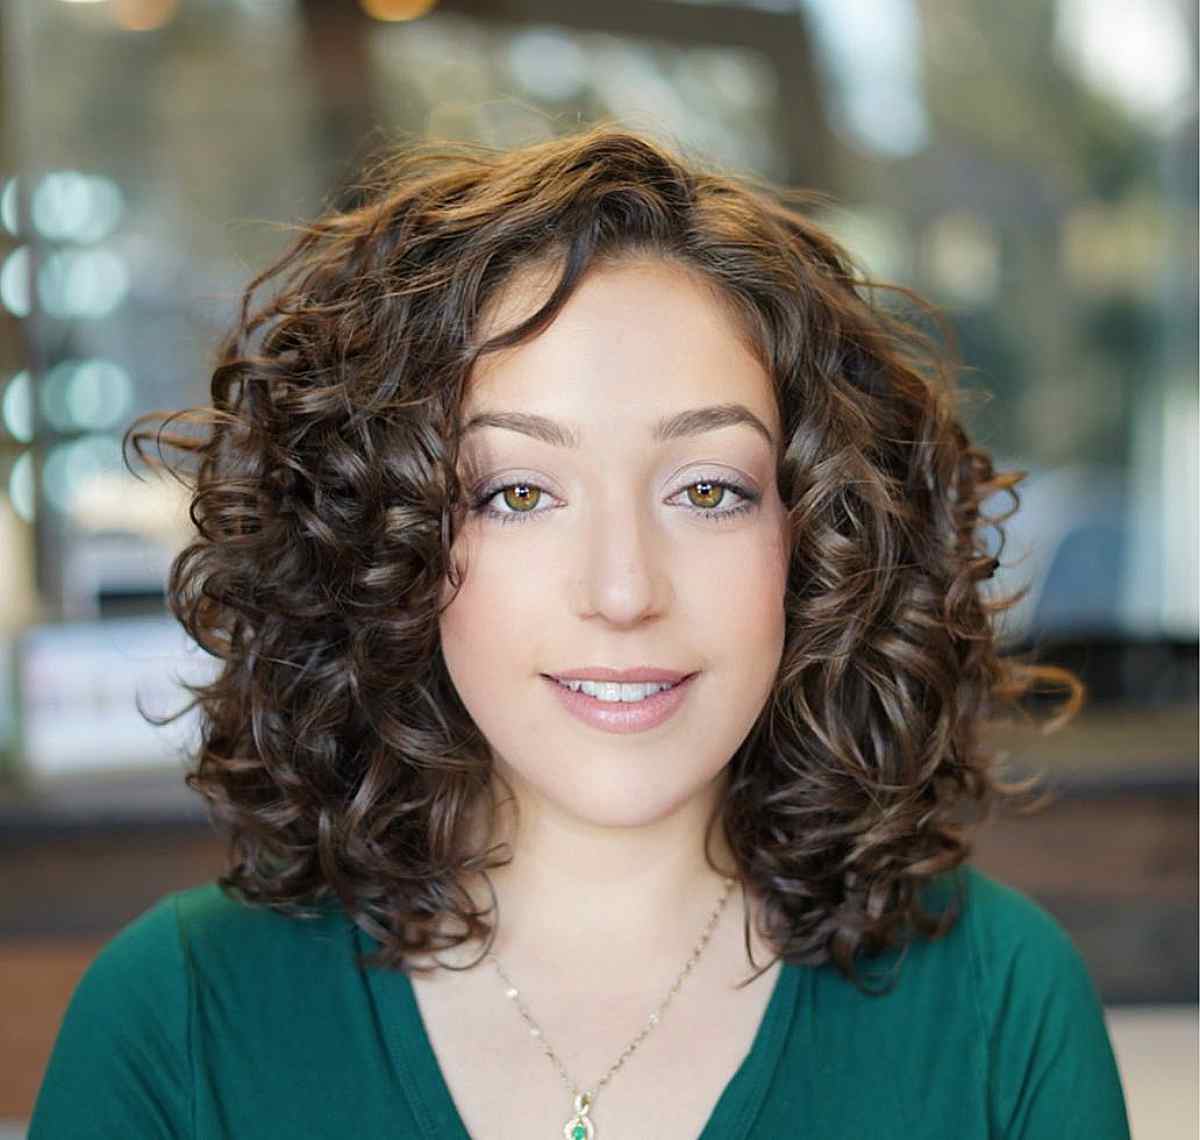 Medium Layered Cut with Fluffy Curls for an Oval Face